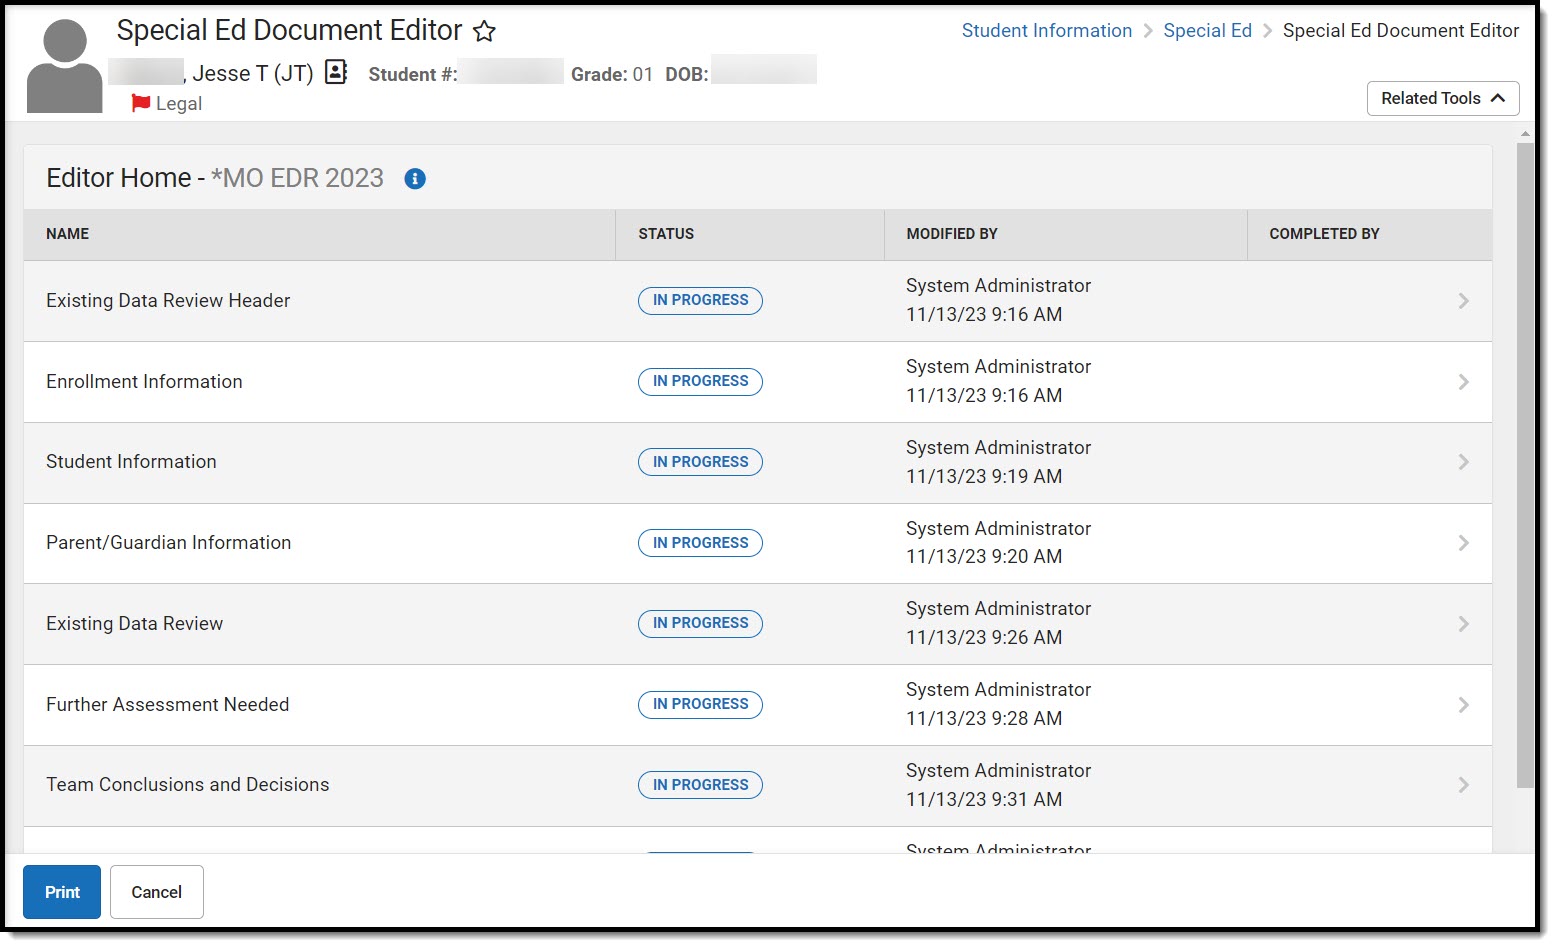 Screenshot of the Existing Data Review editor home screen.